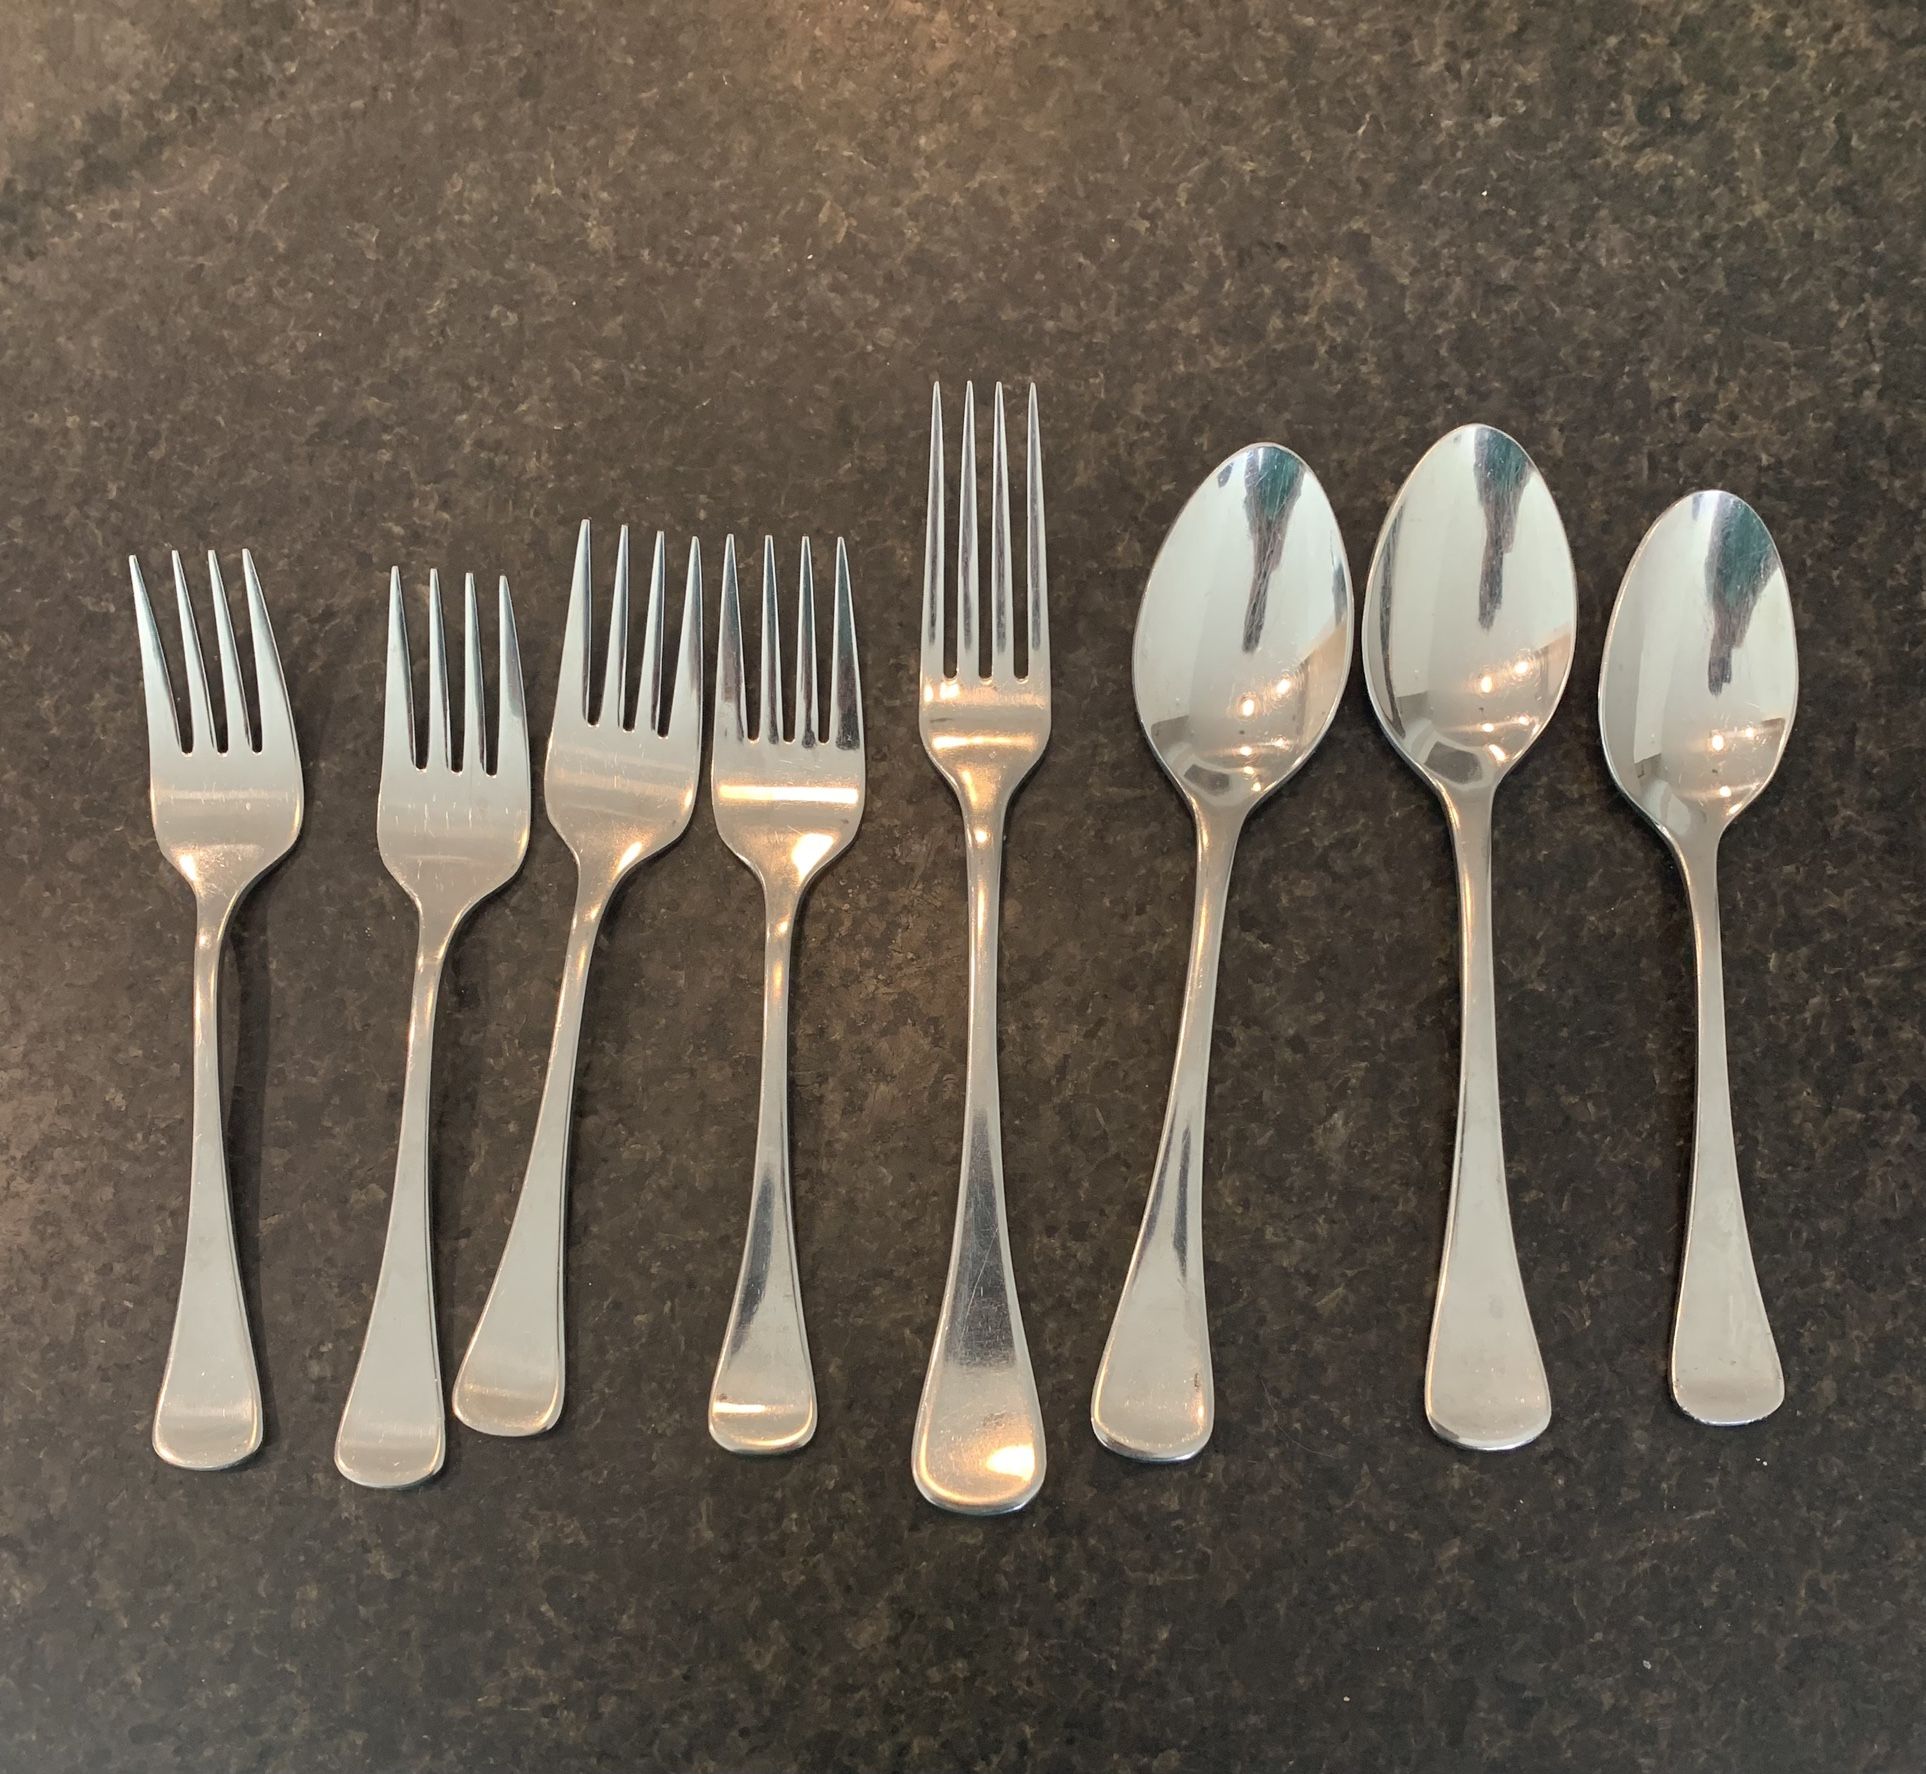 8 Pieces of Matching Silverware by H.F. LTD